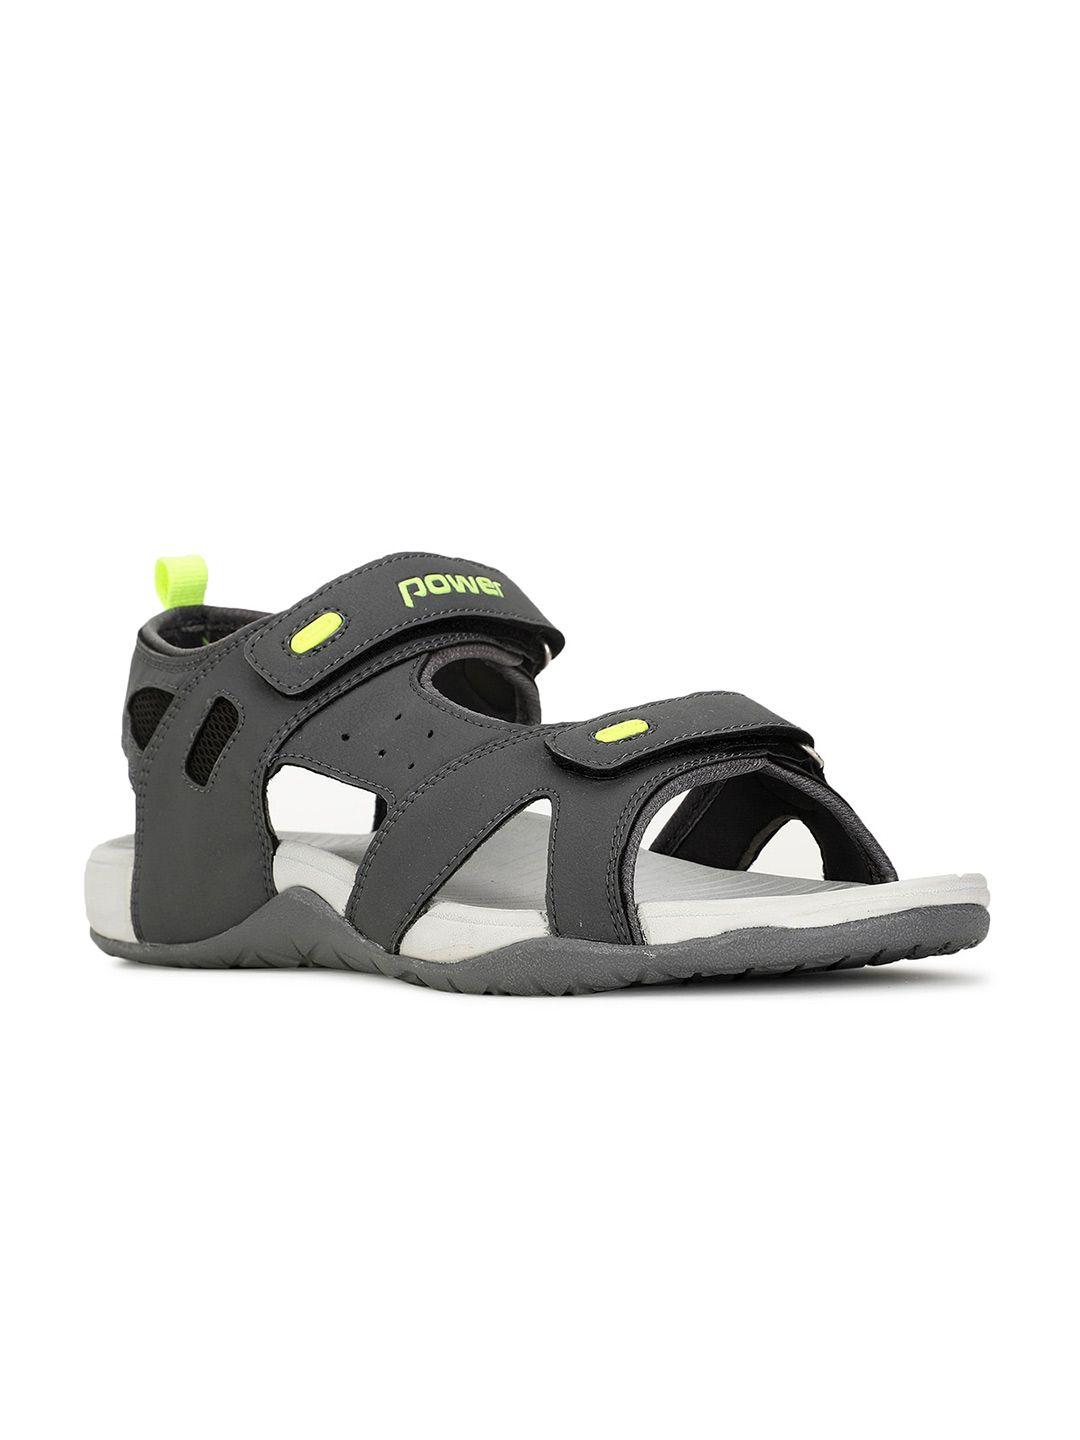 power men perforated sports sandals